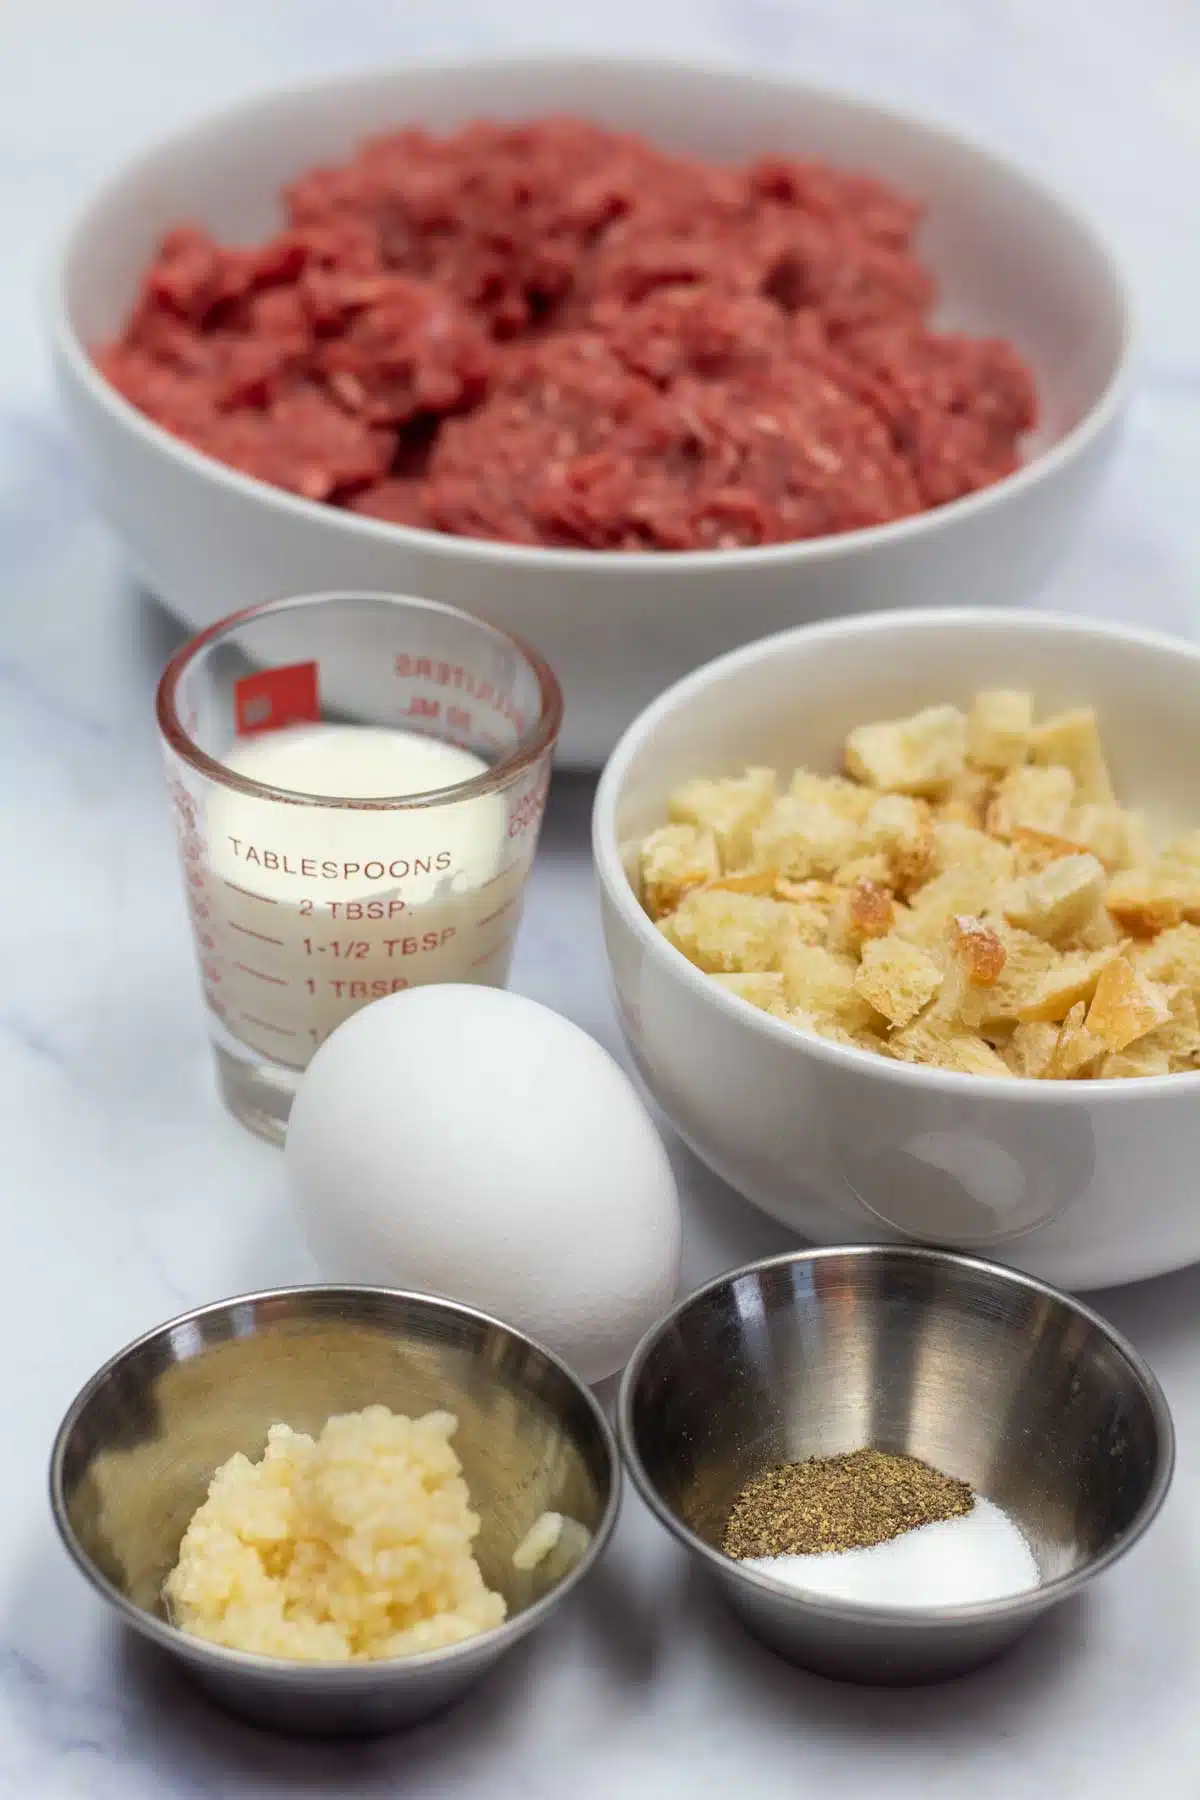 Tall image showing air fryer meatball ingredients.